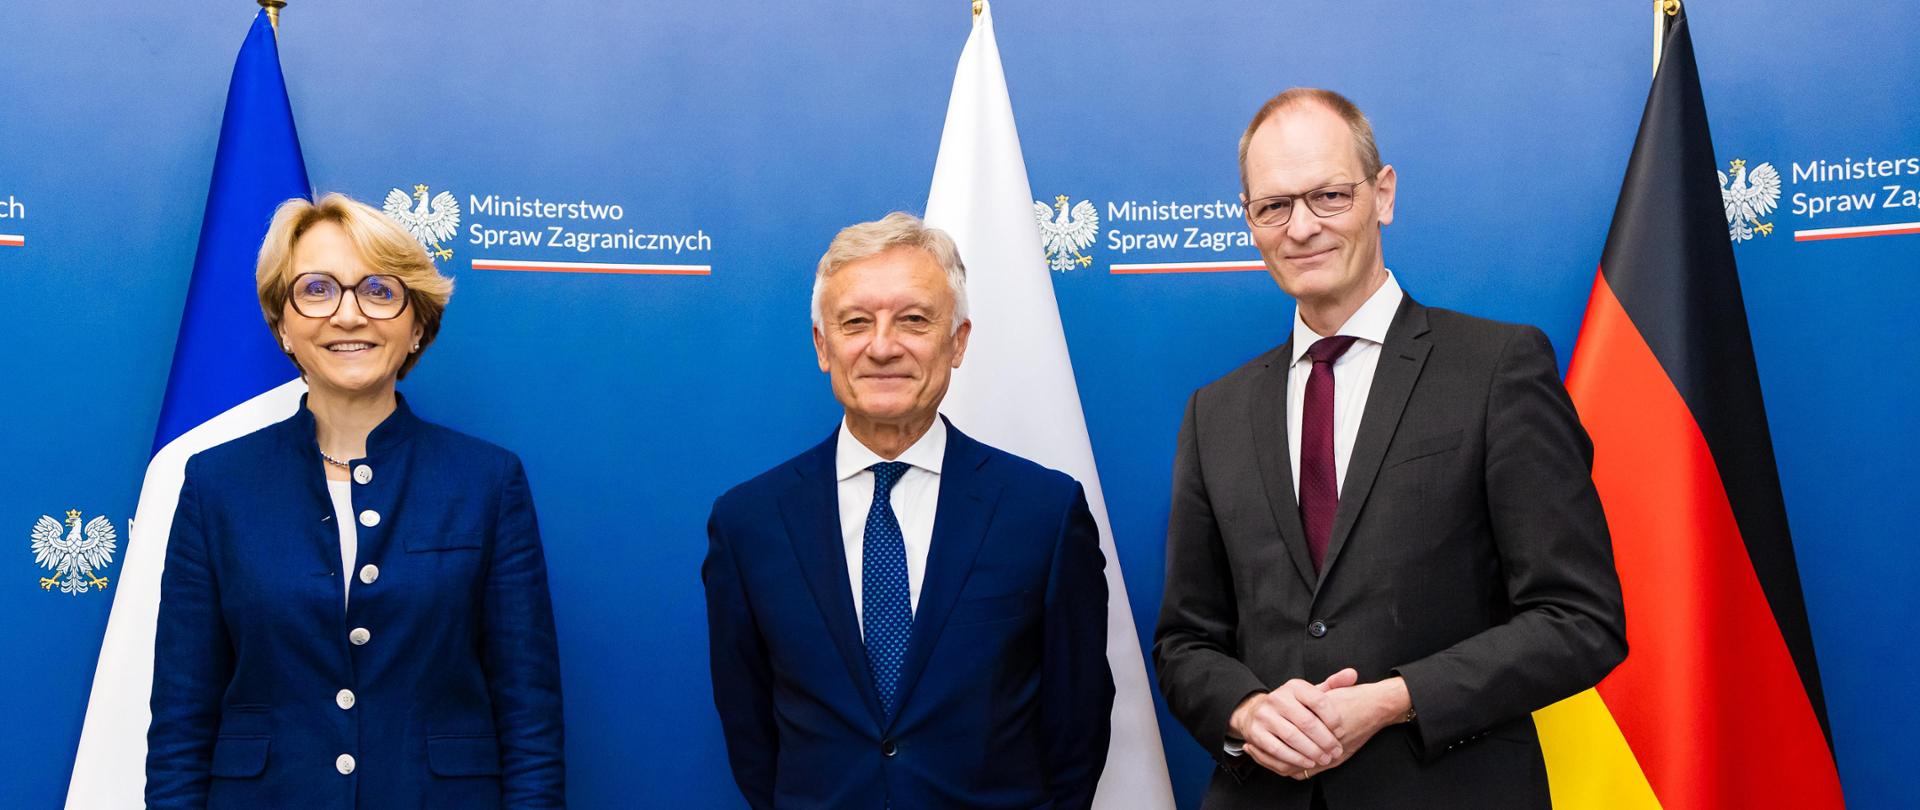 Undersecretary of State Marek Prawda with Anne-Marie Descôtes, Secretary-General of the French Foreign Ministry, and Thomas Bagger, Secretary of State at the German Foreign Ministry, Polish, French and German flags in the background